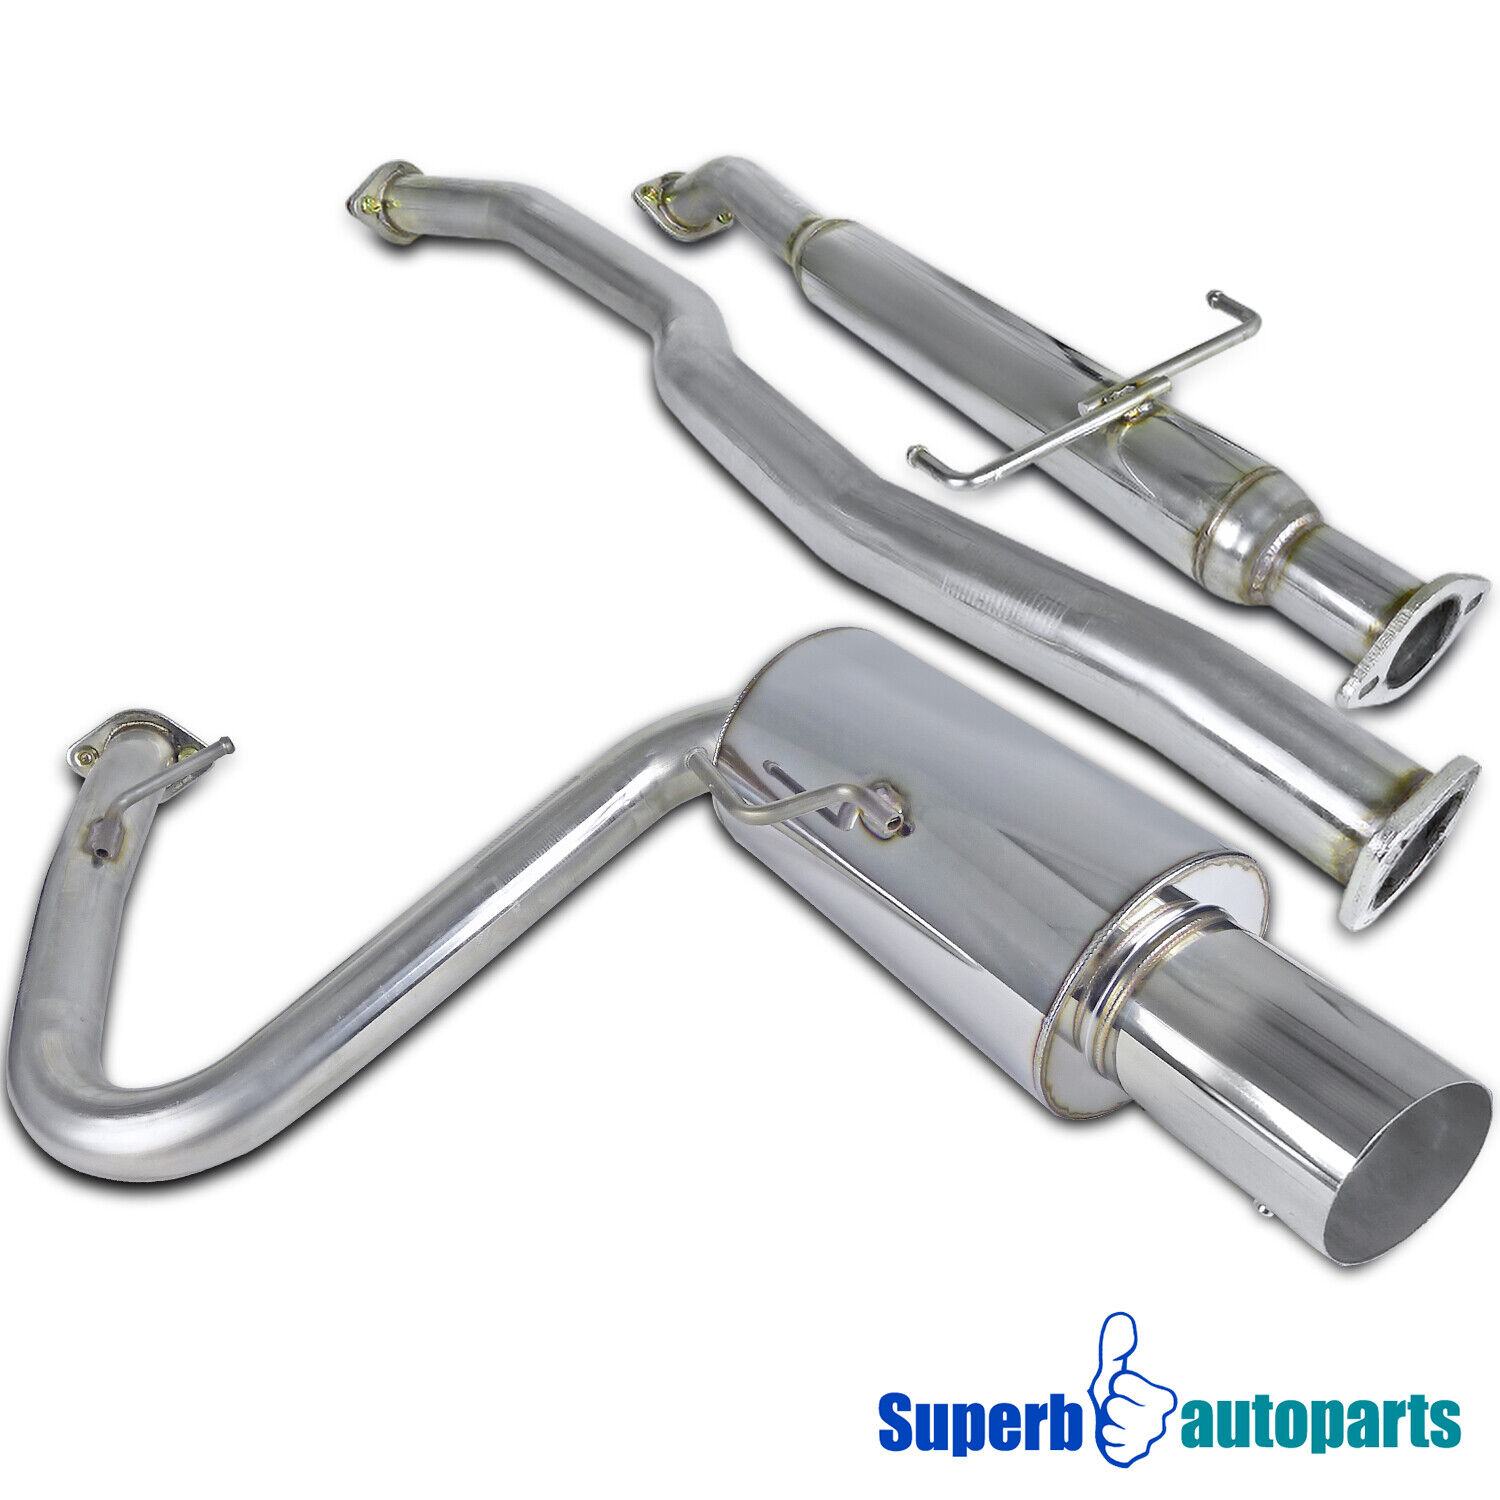 Fits 2005-2010 Scion 05-10 tC Stainless Muffler Catback Exhaust System